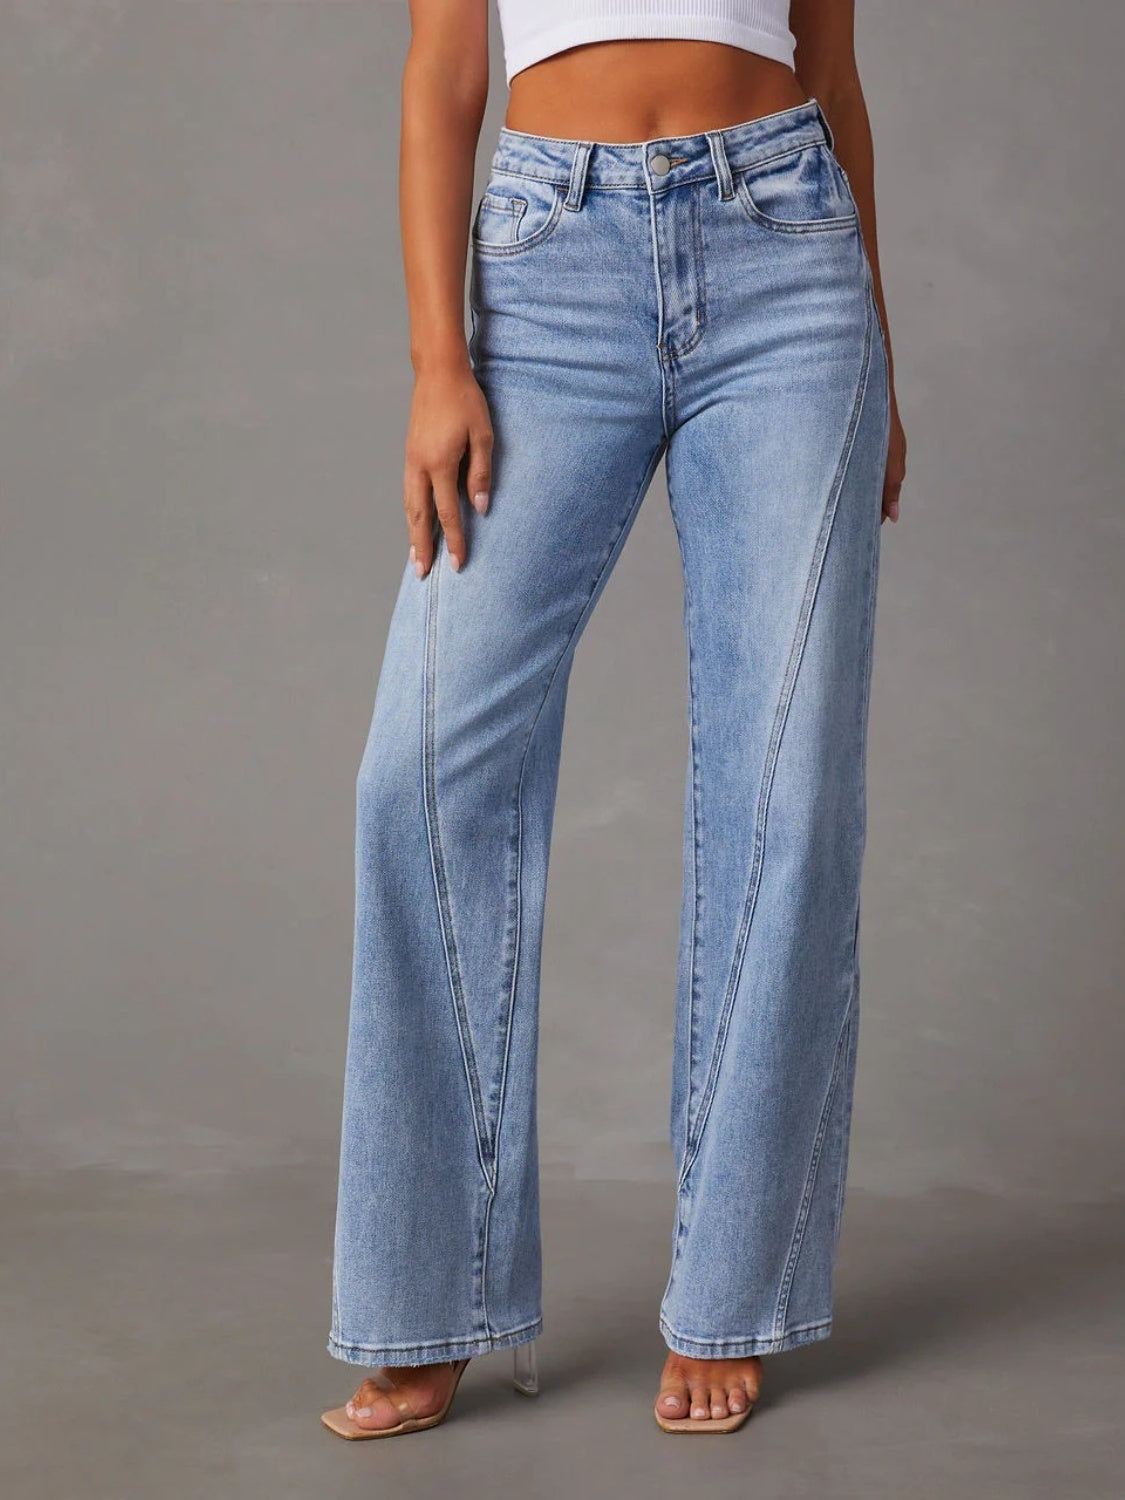 Just BE. Evette High Waist Straight Jeans